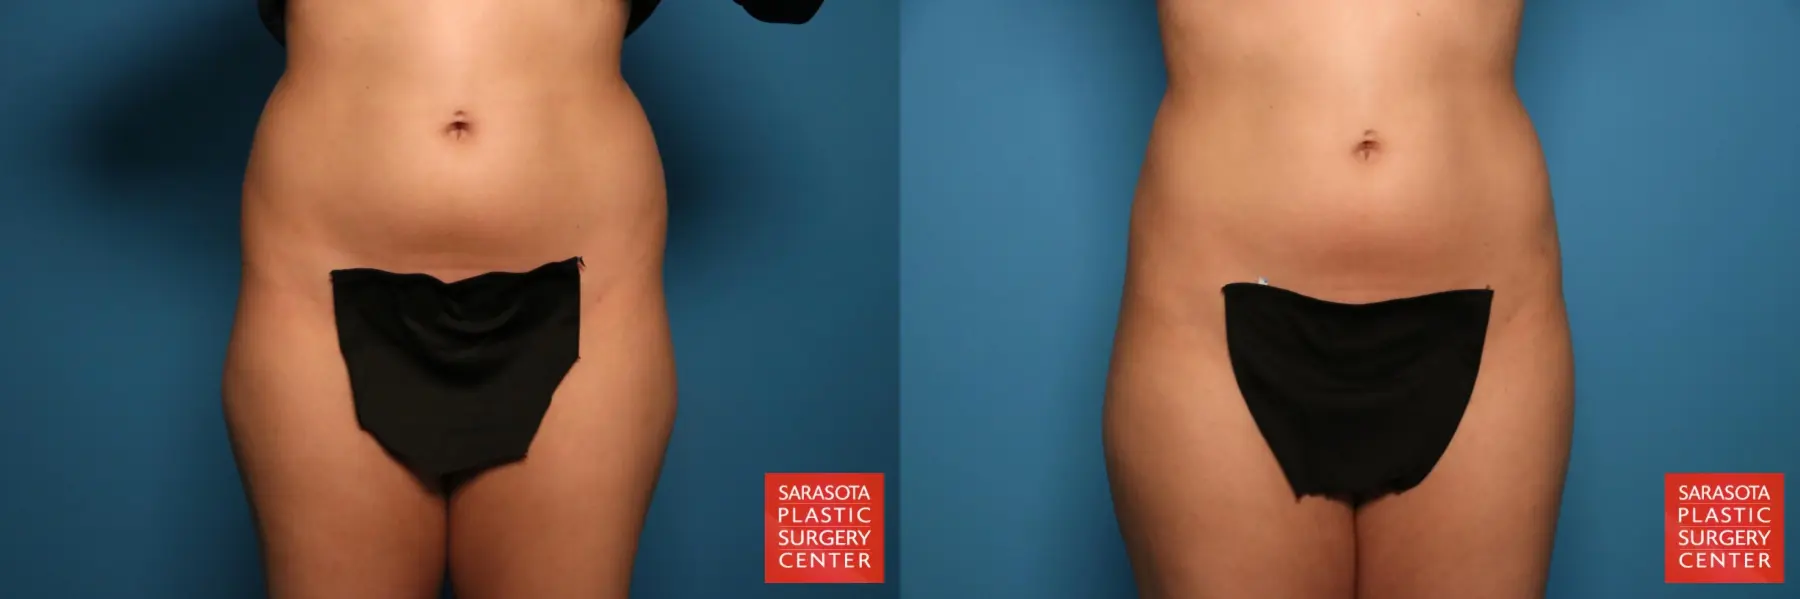 Liposuction: Patient 15 - Before and After 1